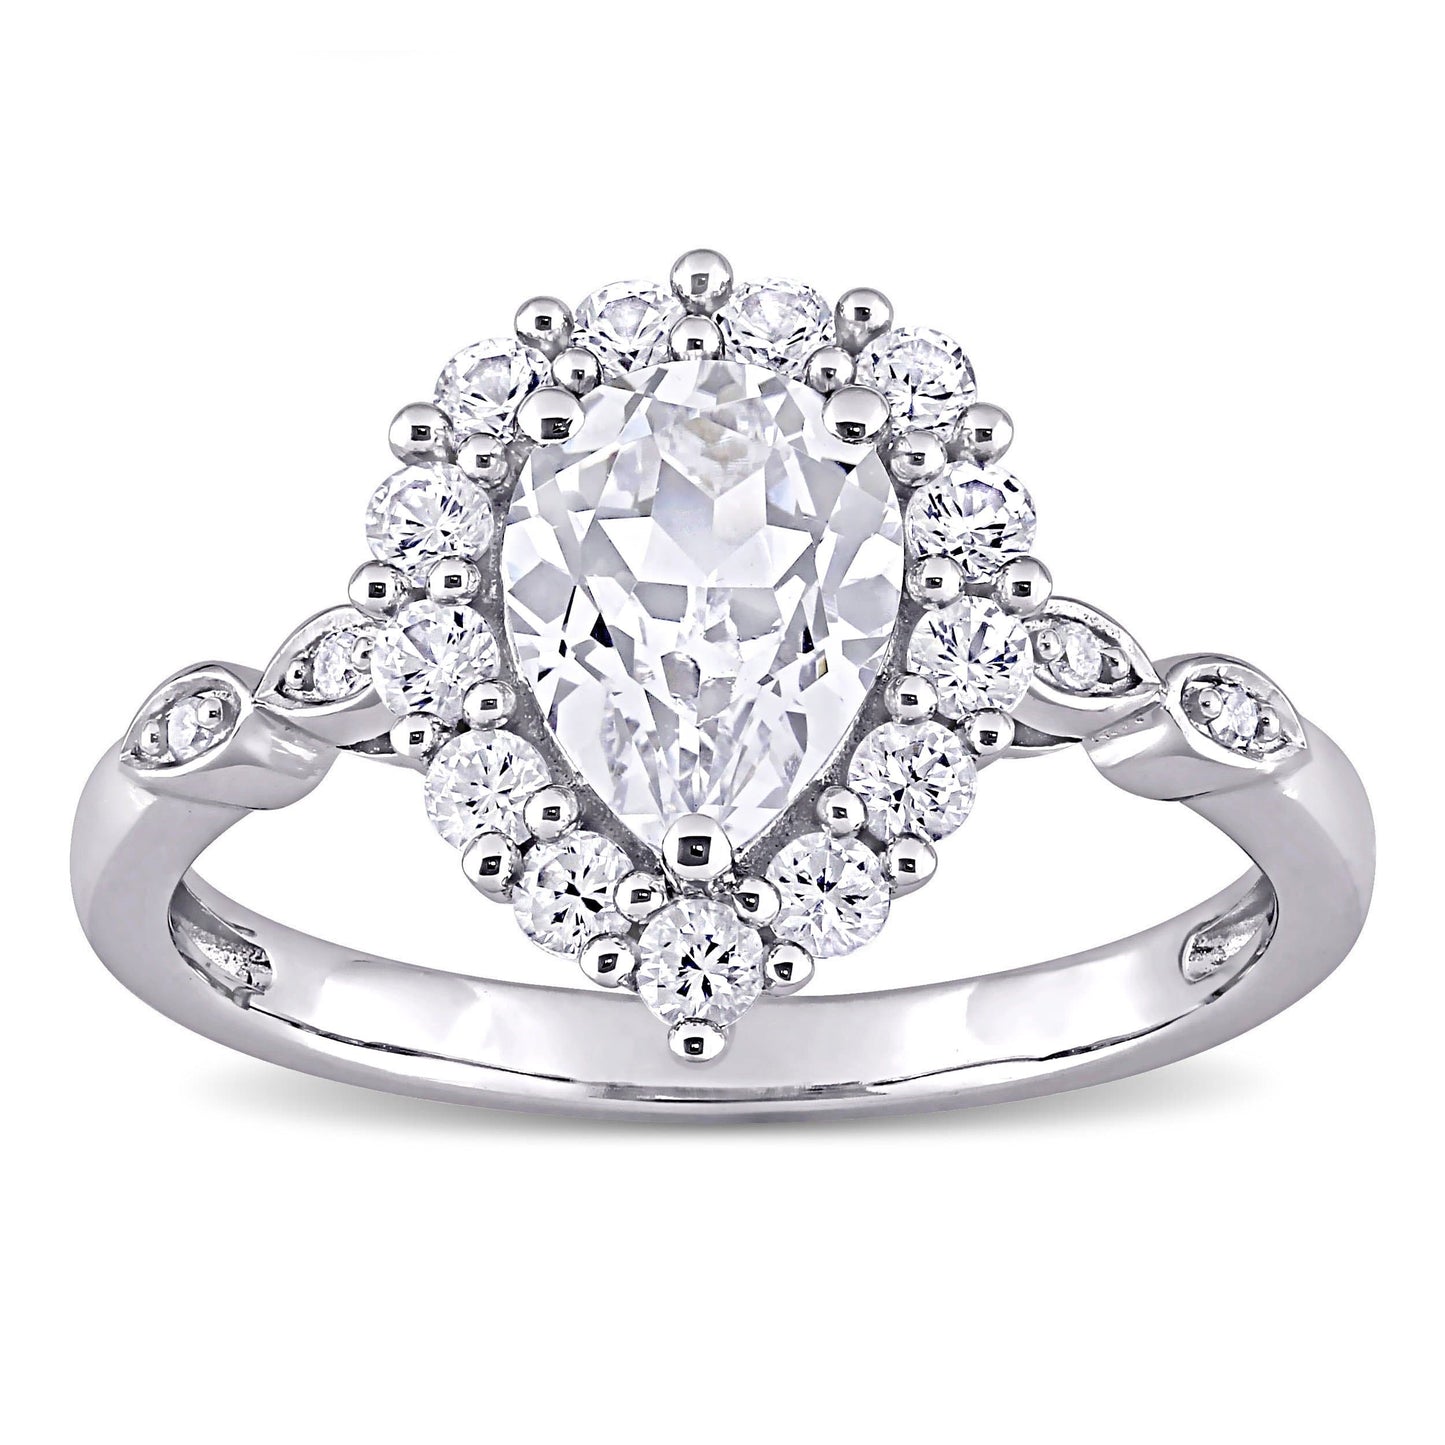 2.45ct White Sapphire Halo Ring with Diamond Accents